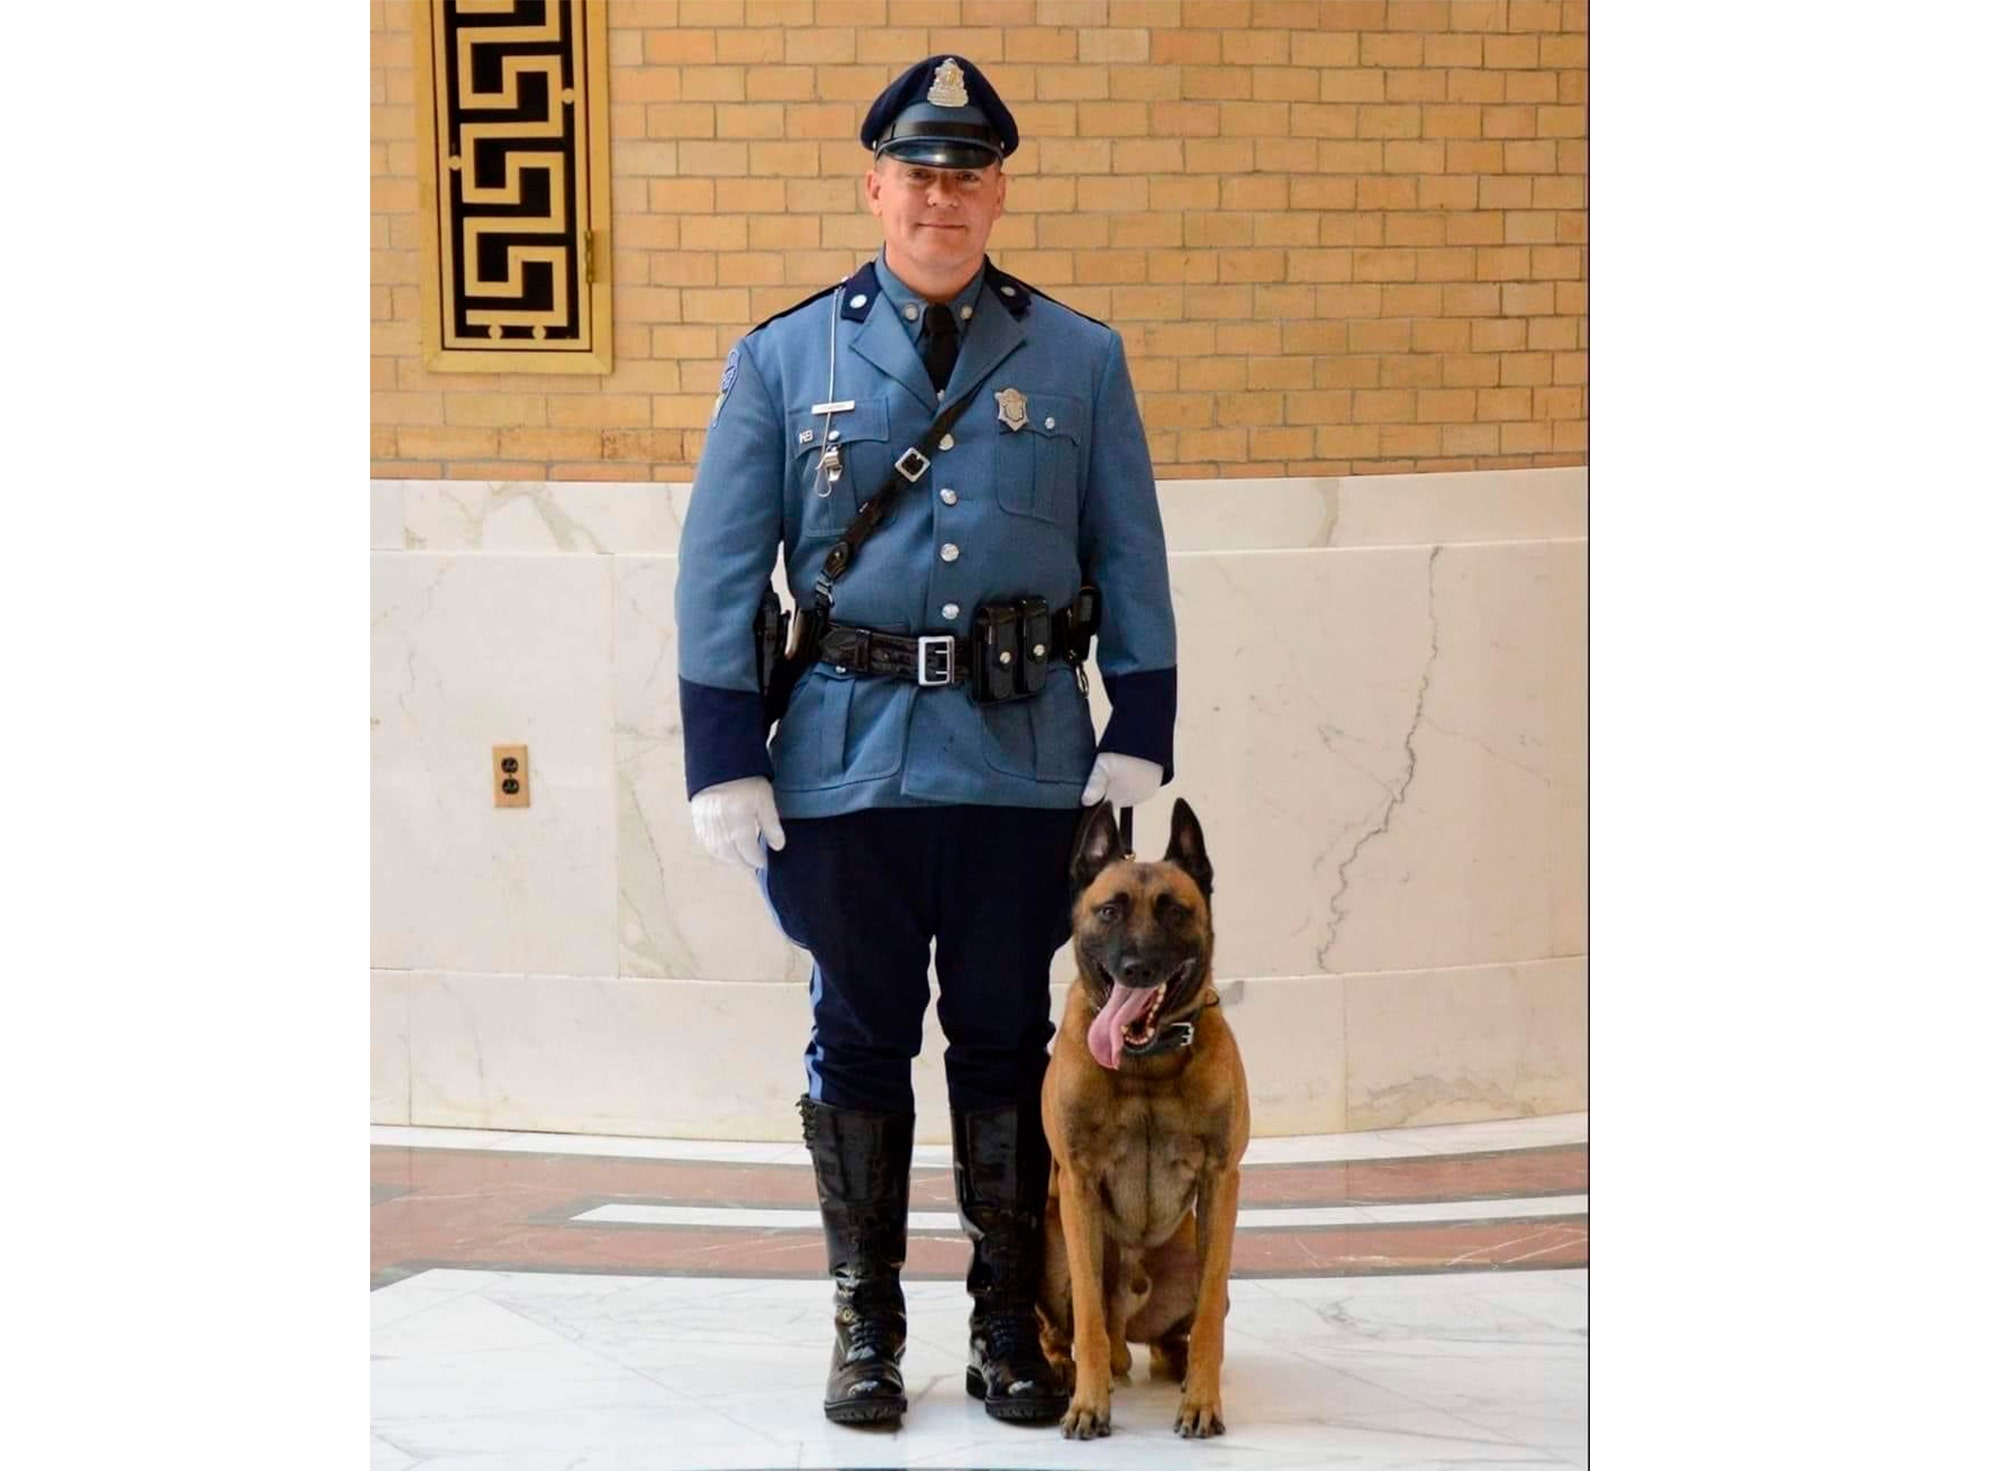 Massachusetts police dog fatally shot by man barricaded in his home